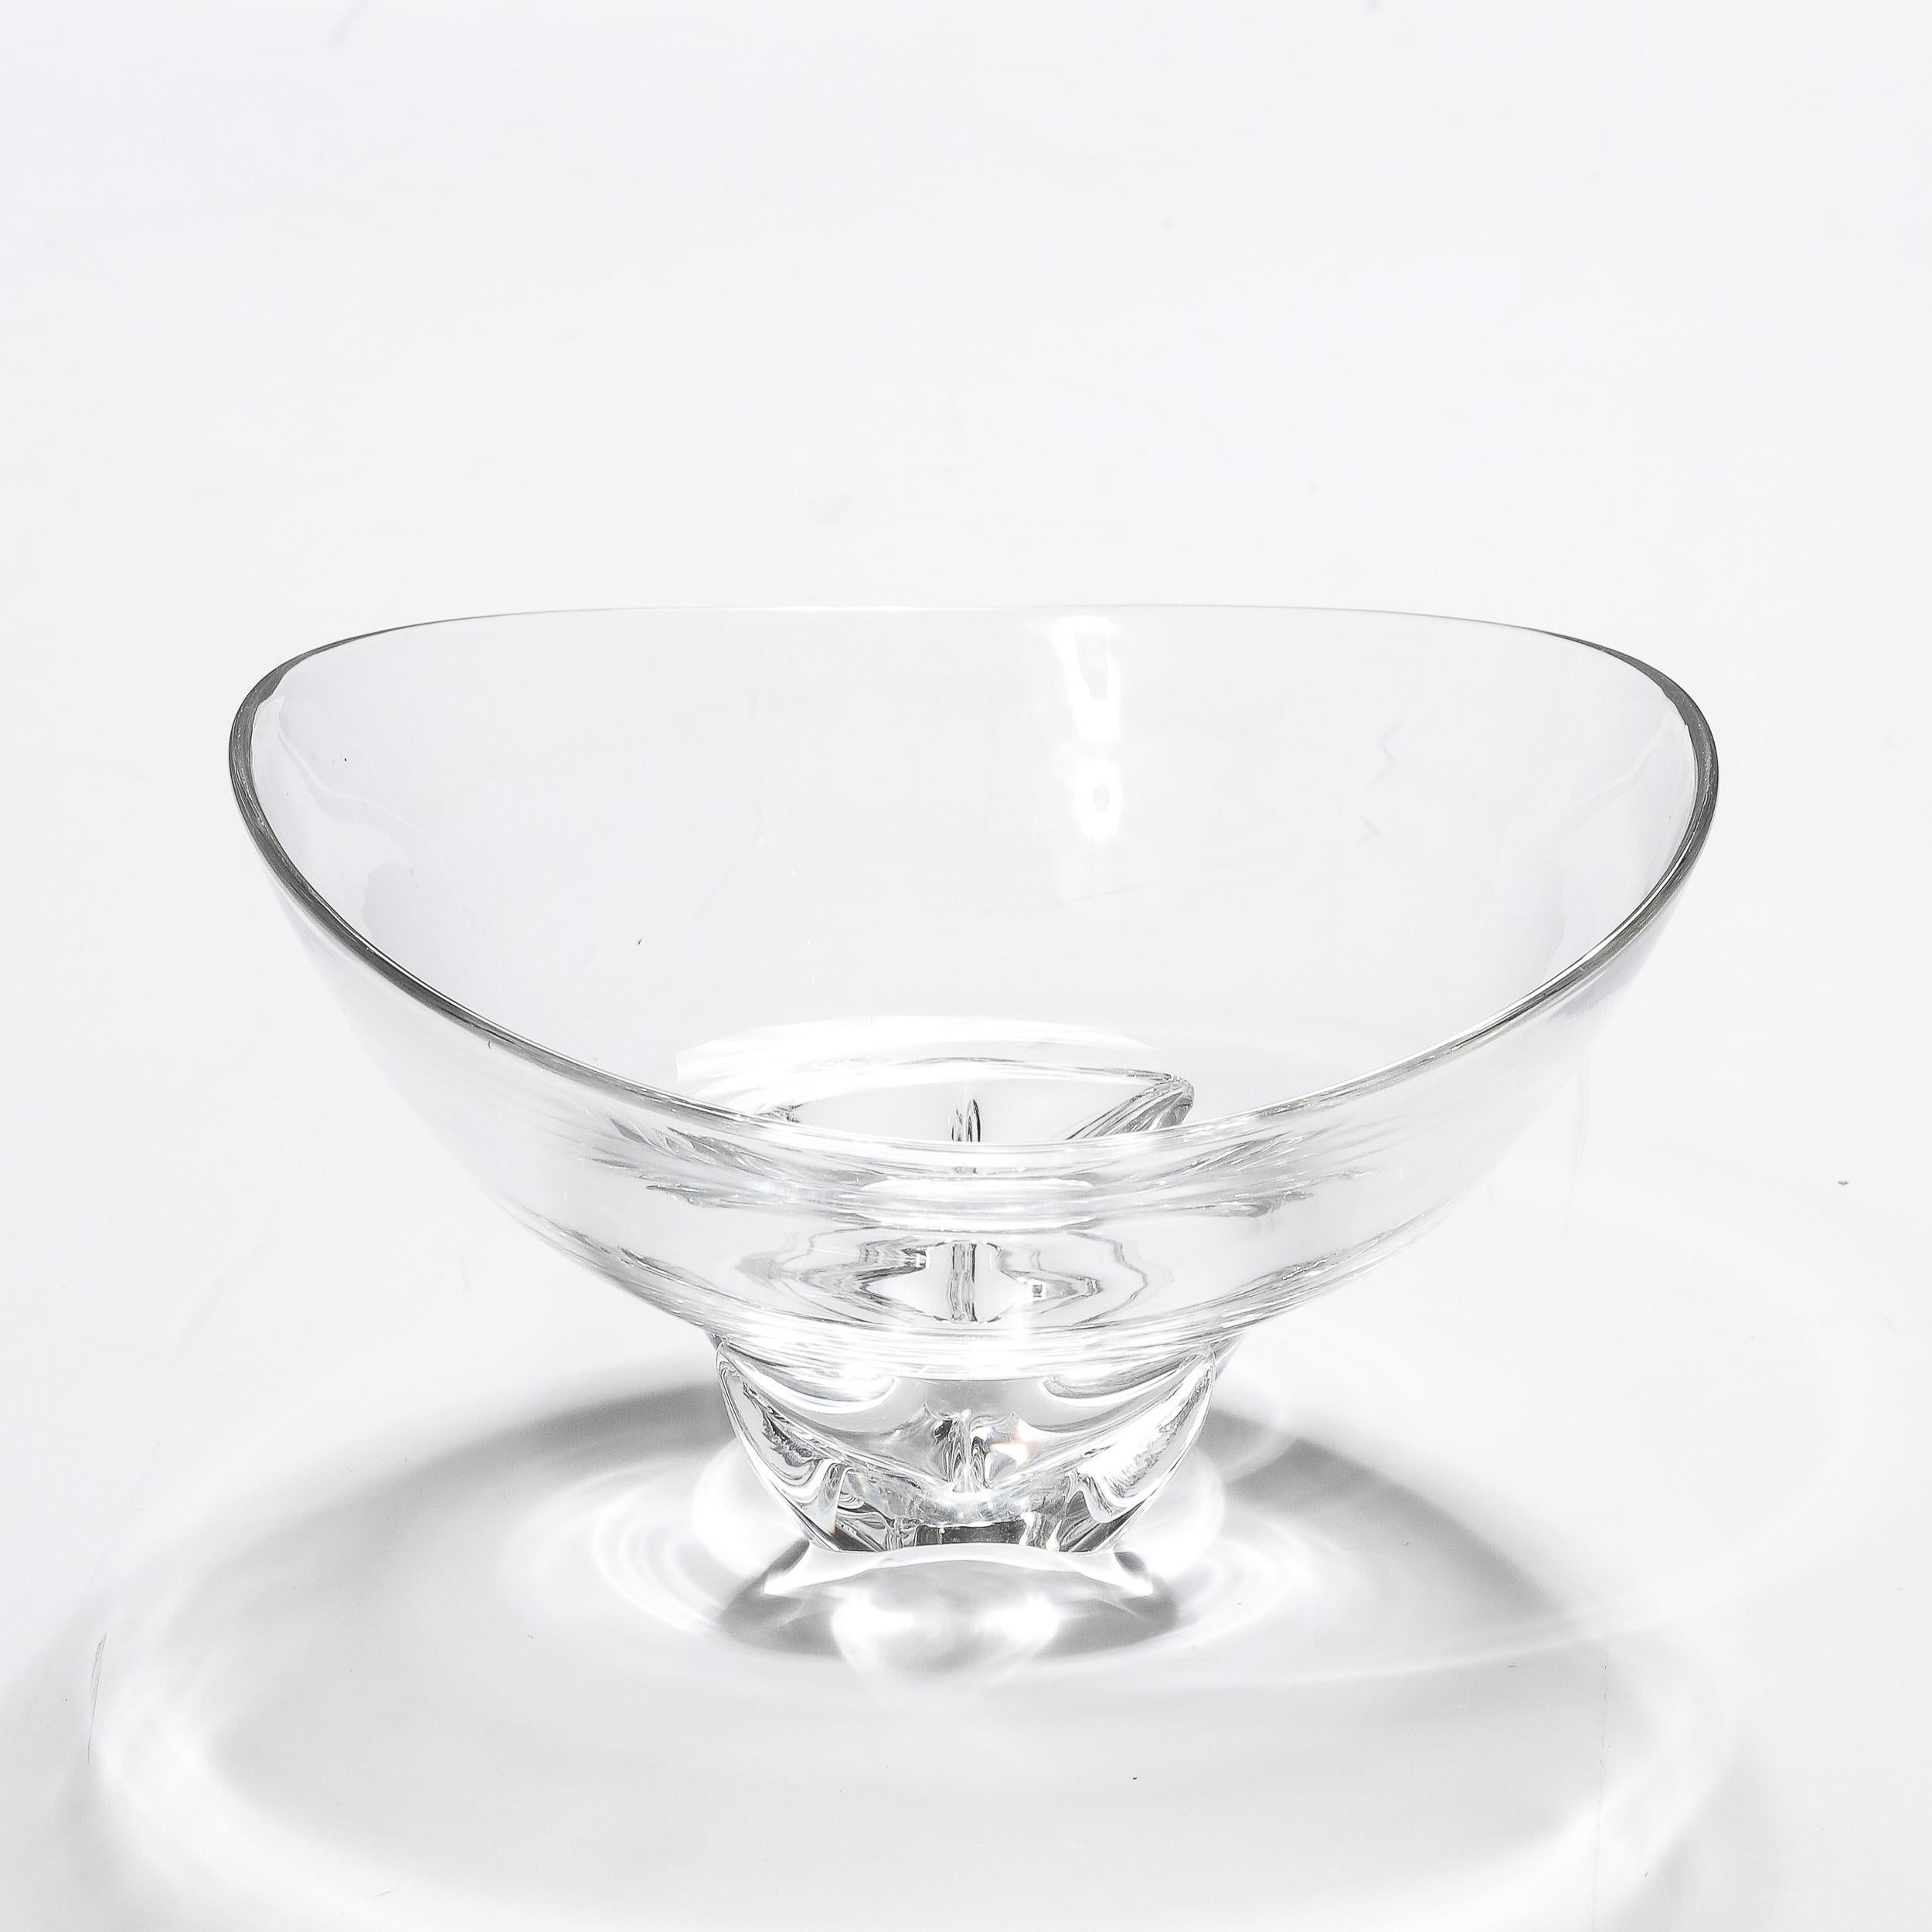 Mid-20th Century Mid-Century Modernist Bowl W/ Organic Sculptural Base Signed Steuben  For Sale